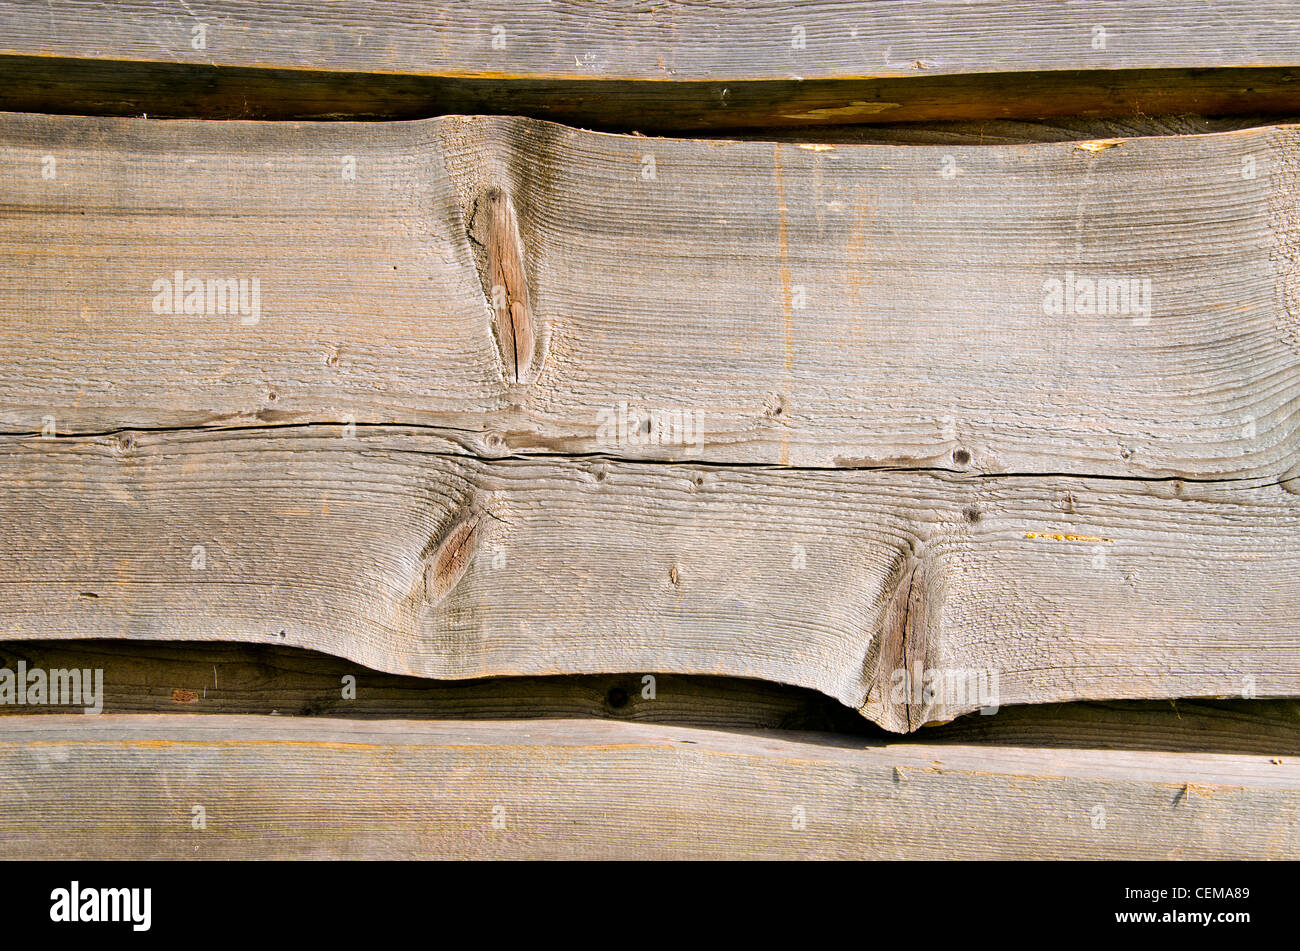 Wooden village house walls carved planks closeup background. Stock Photo